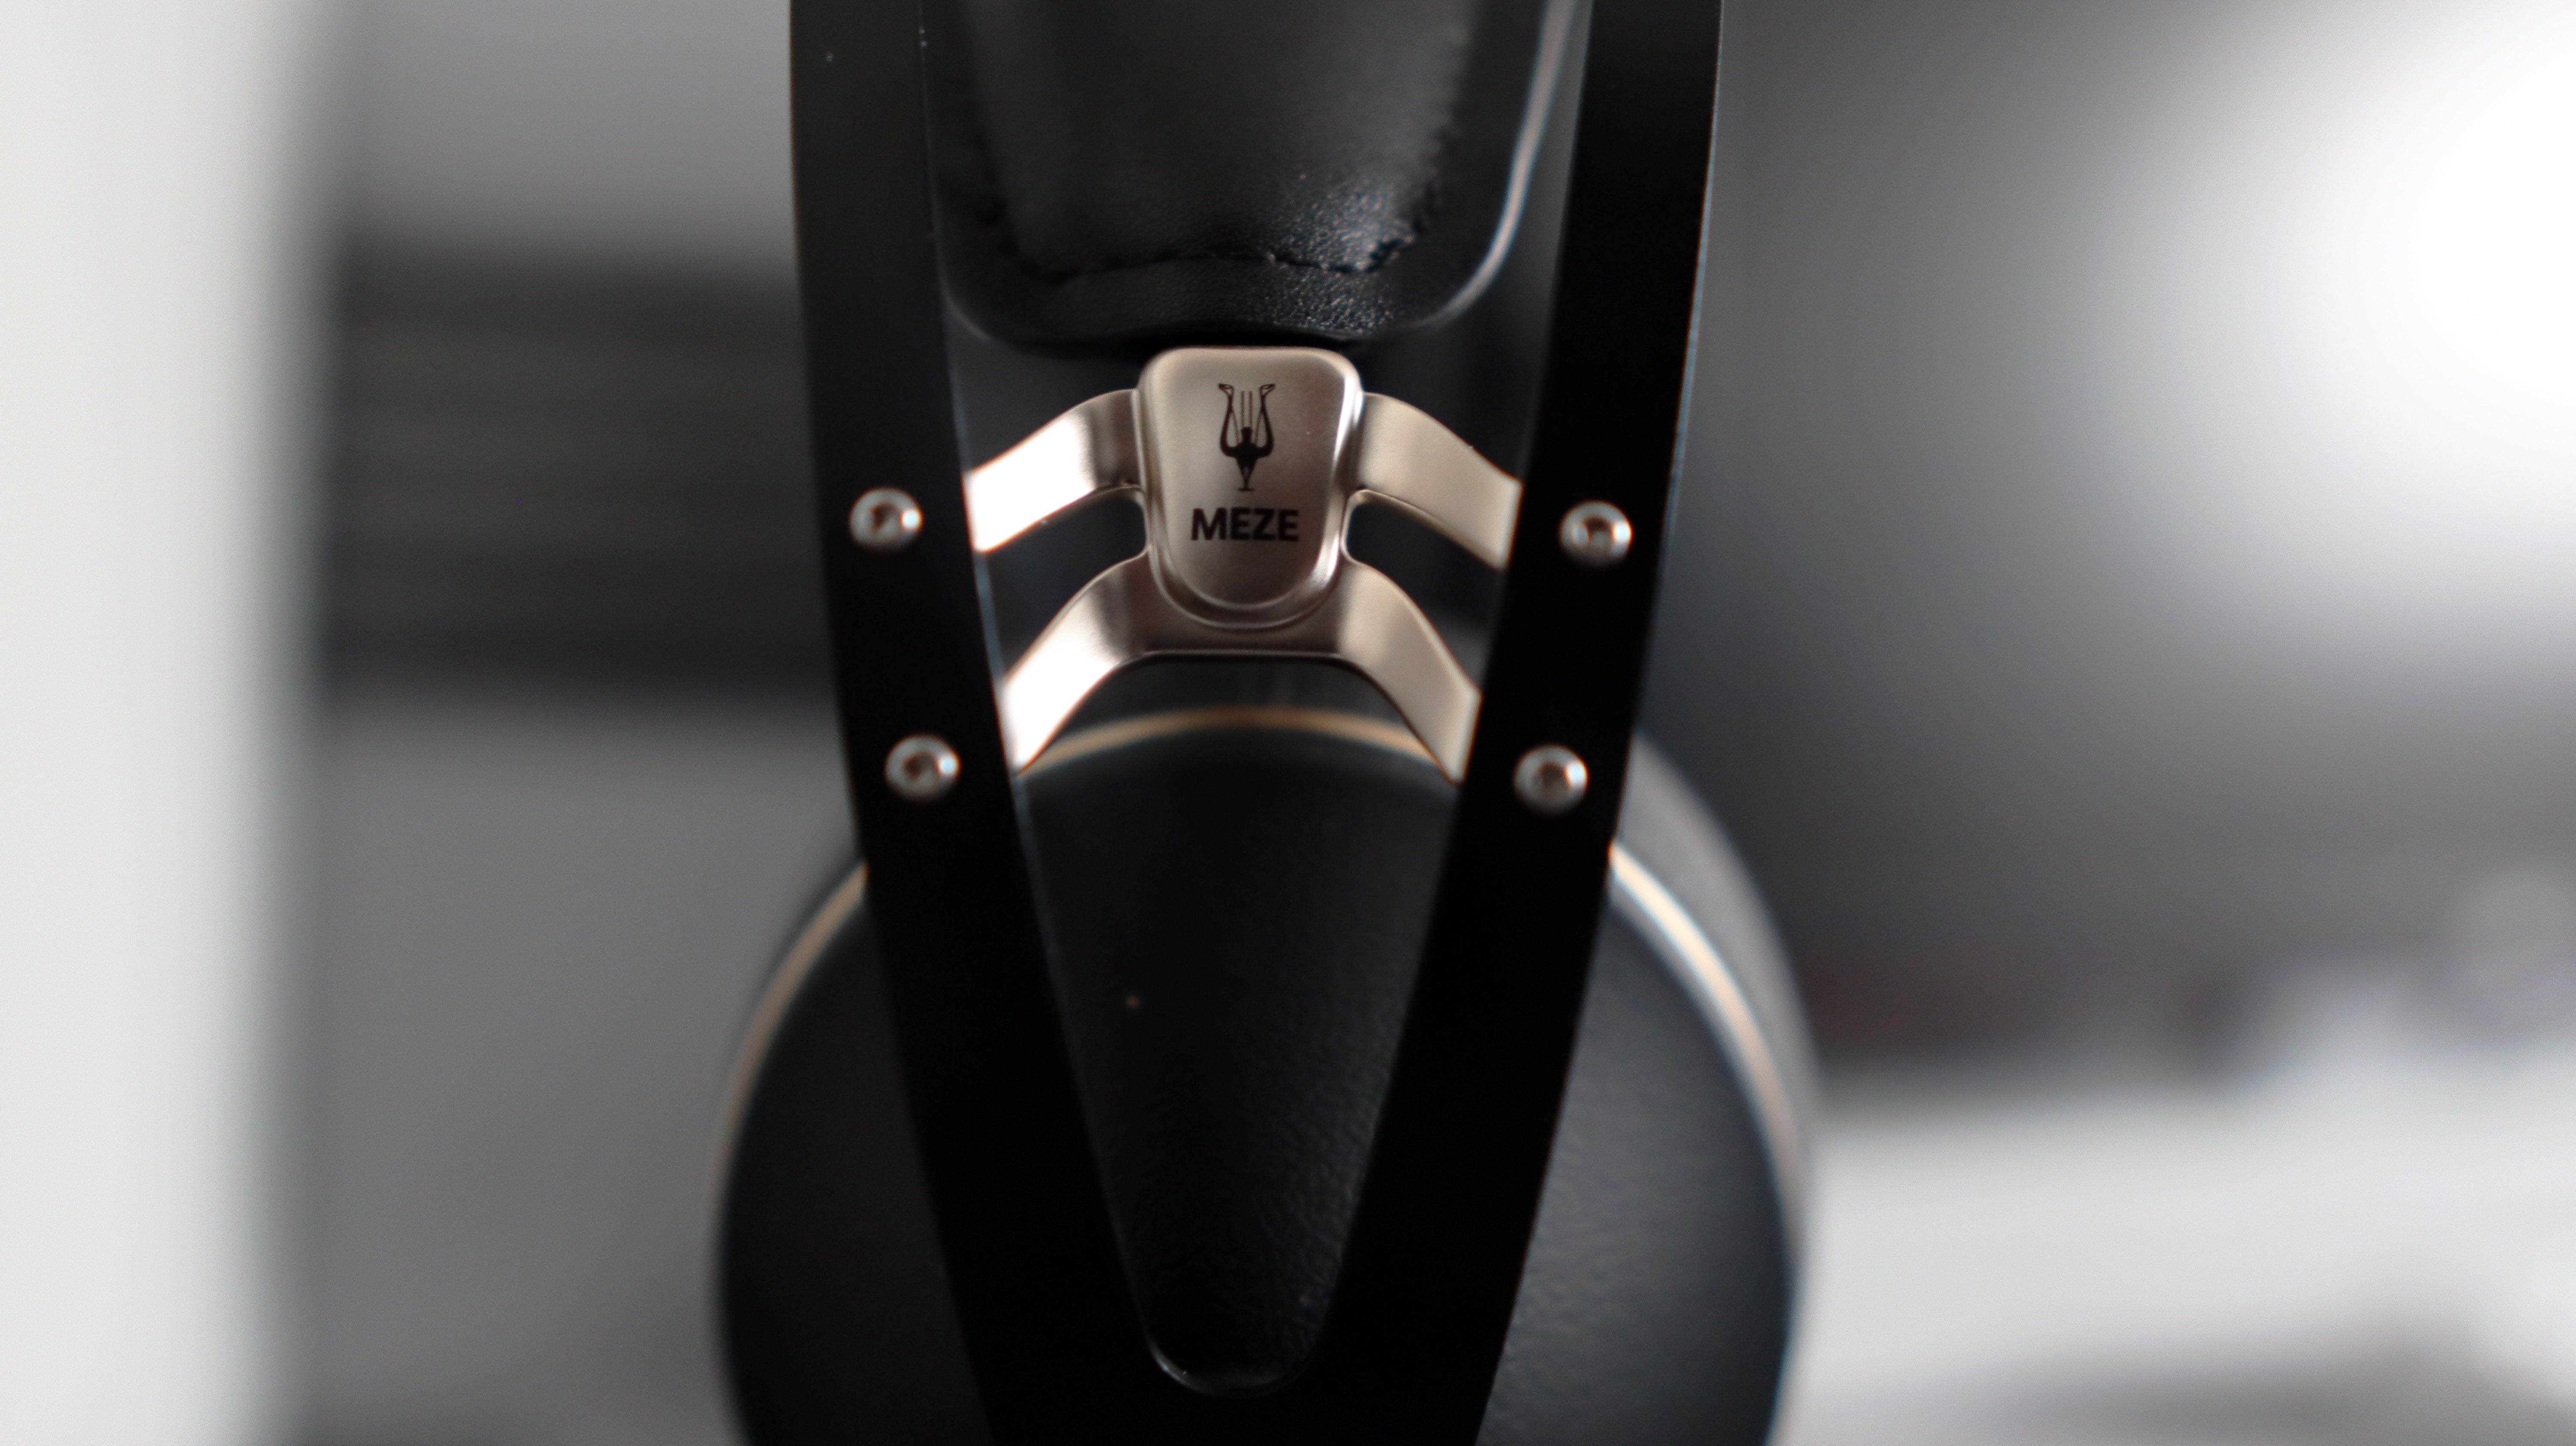 Meze 99 Neo review: stylish headphones with a warm, detailed sound 